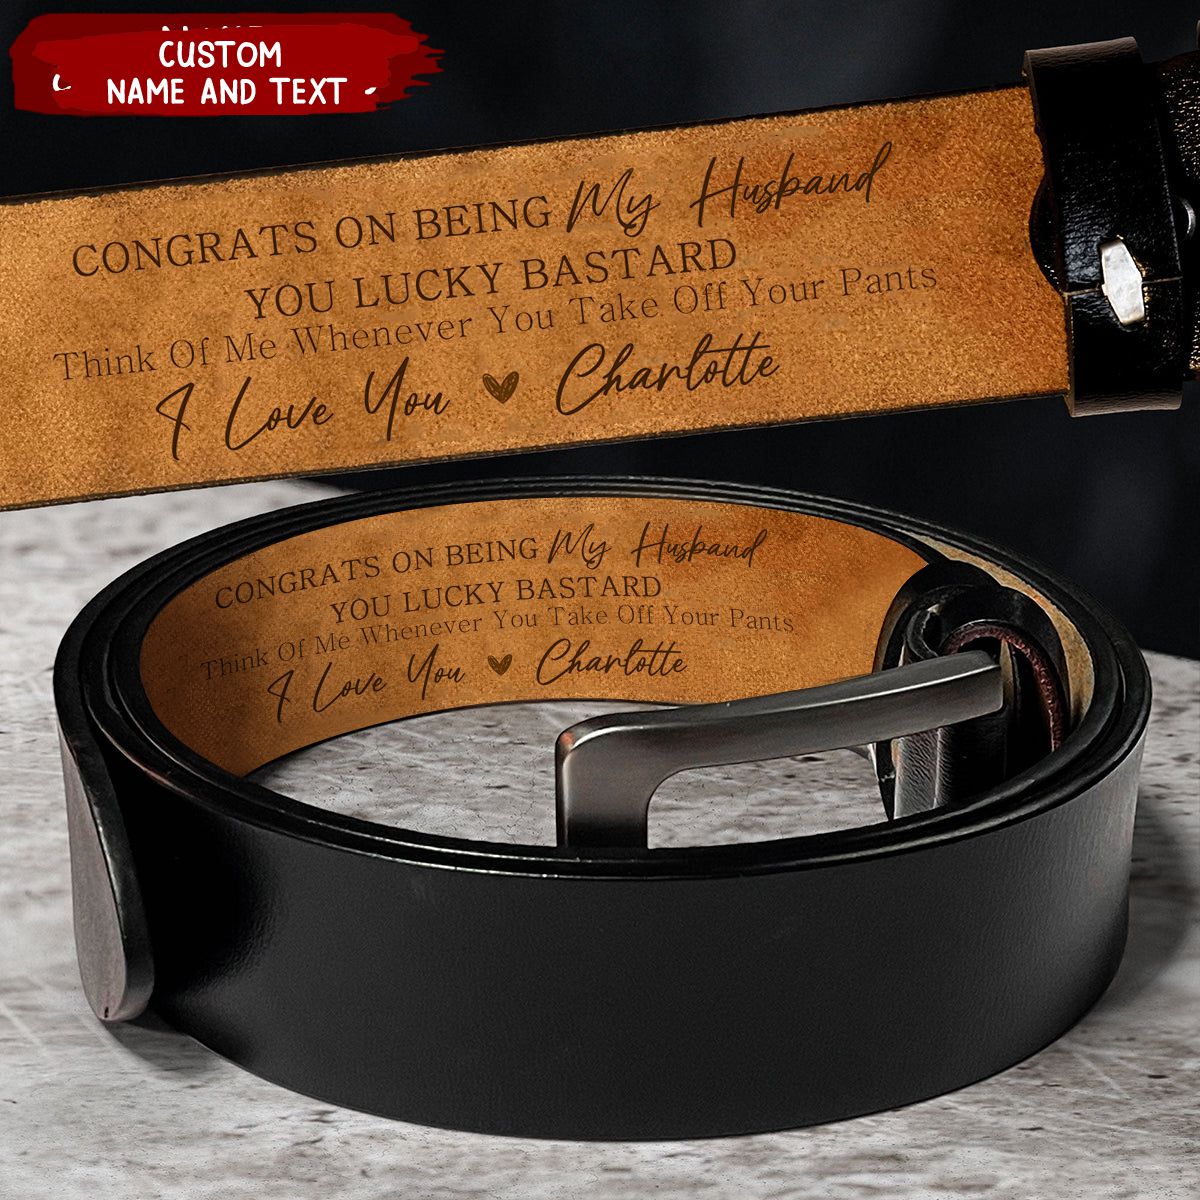 Congrats On Being My Husband You Lucky- Personalized Engraved Leather Belt